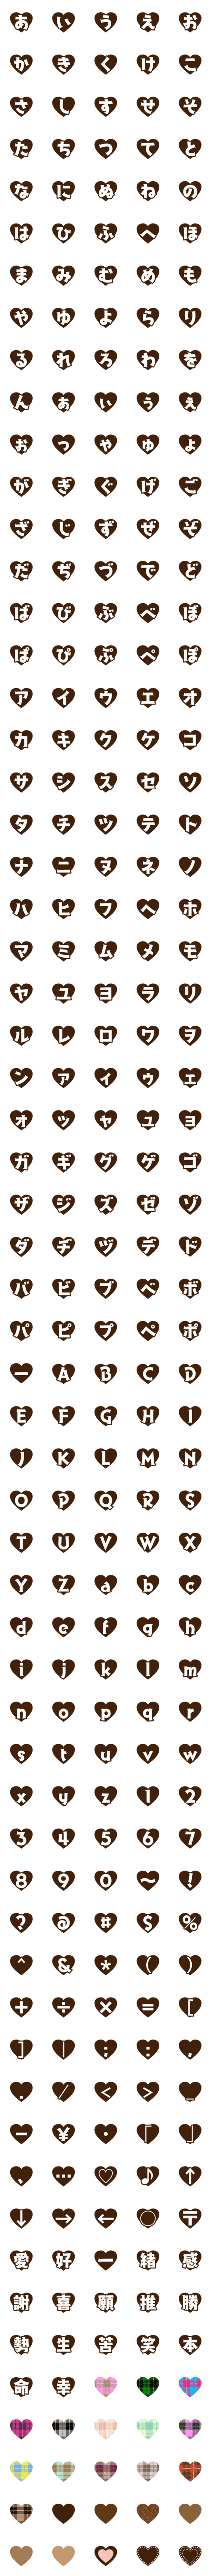 [LINE絵文字]ハート型チョコレート文字の画像一覧